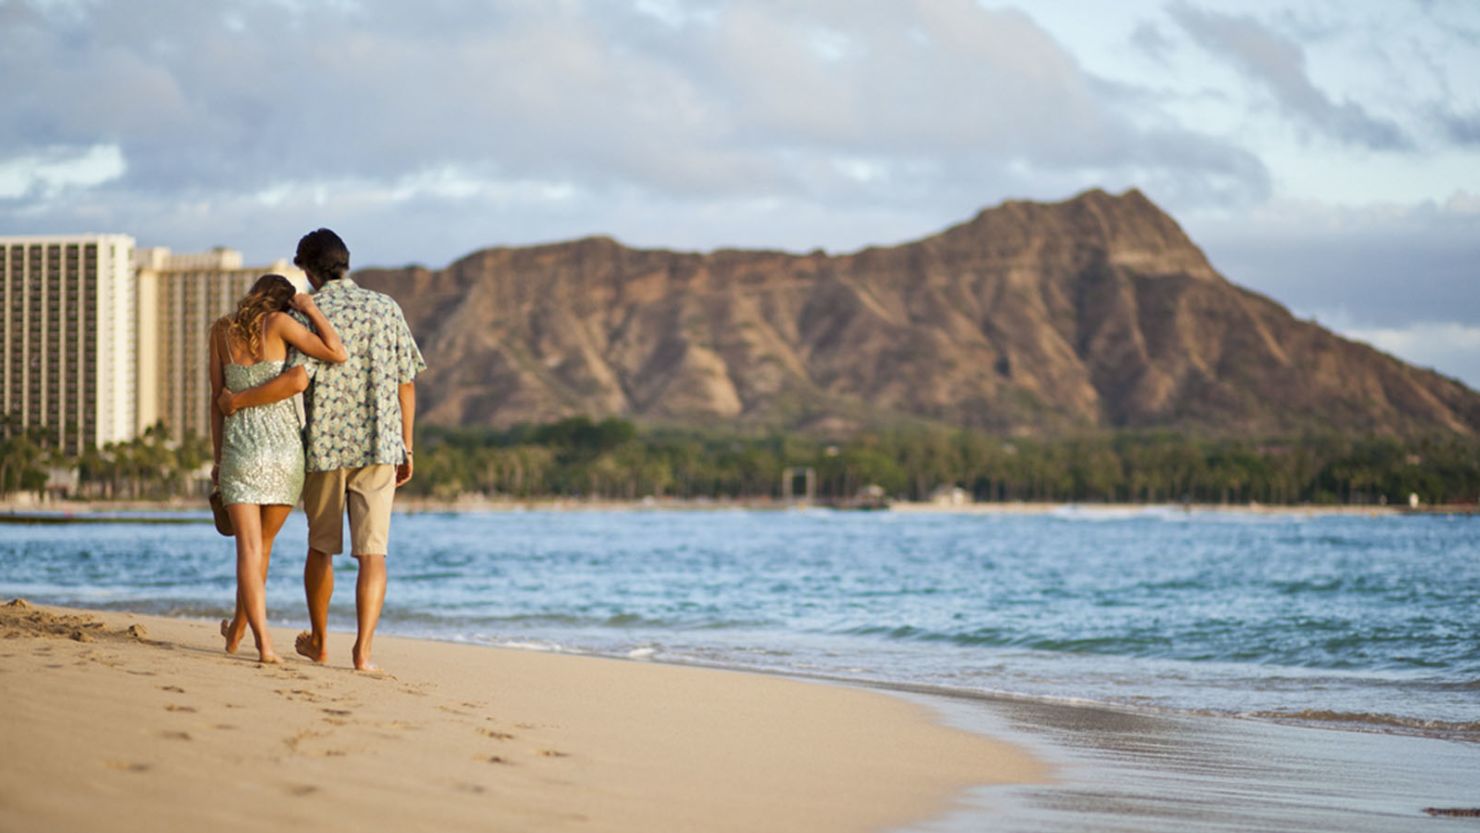 We won't promise seclusion in Waikiki, but romance in the shadow of Diamond Head is still one of Honoulu's great thrills.